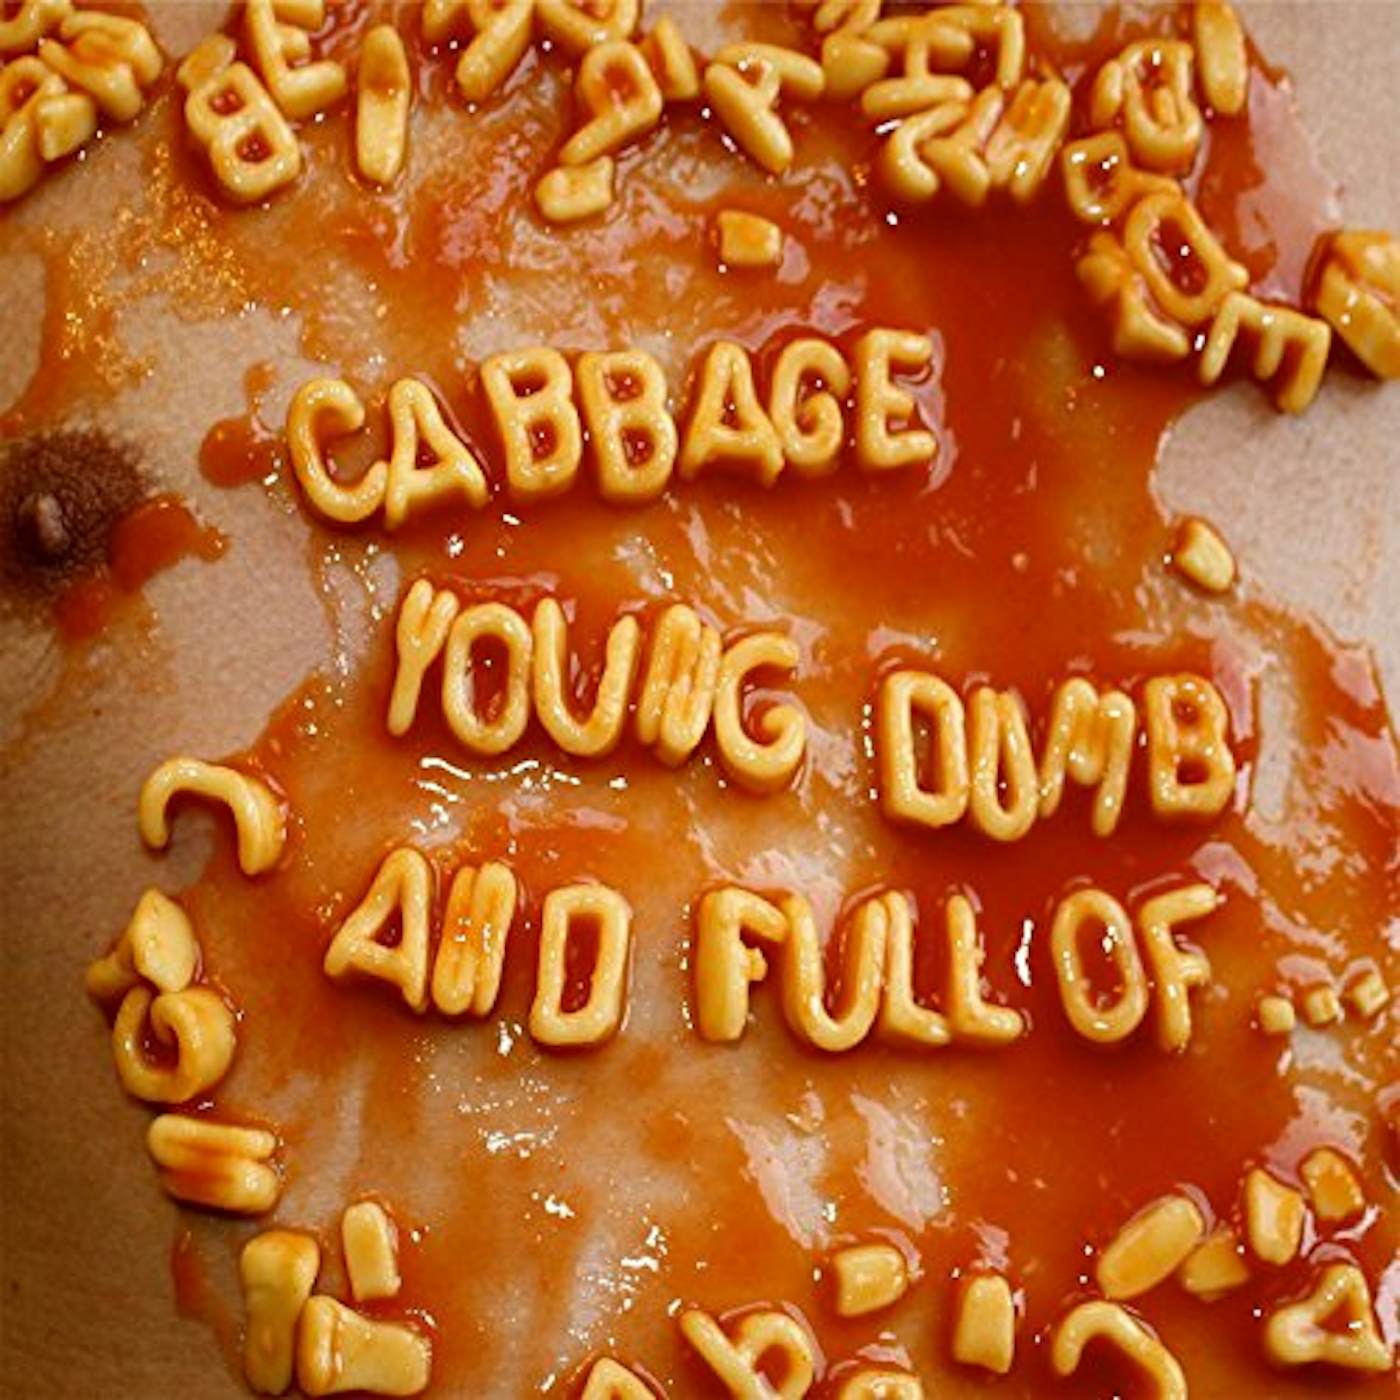 Cabbage YOUNG, DUMB AND FULL OF Vinyl Record